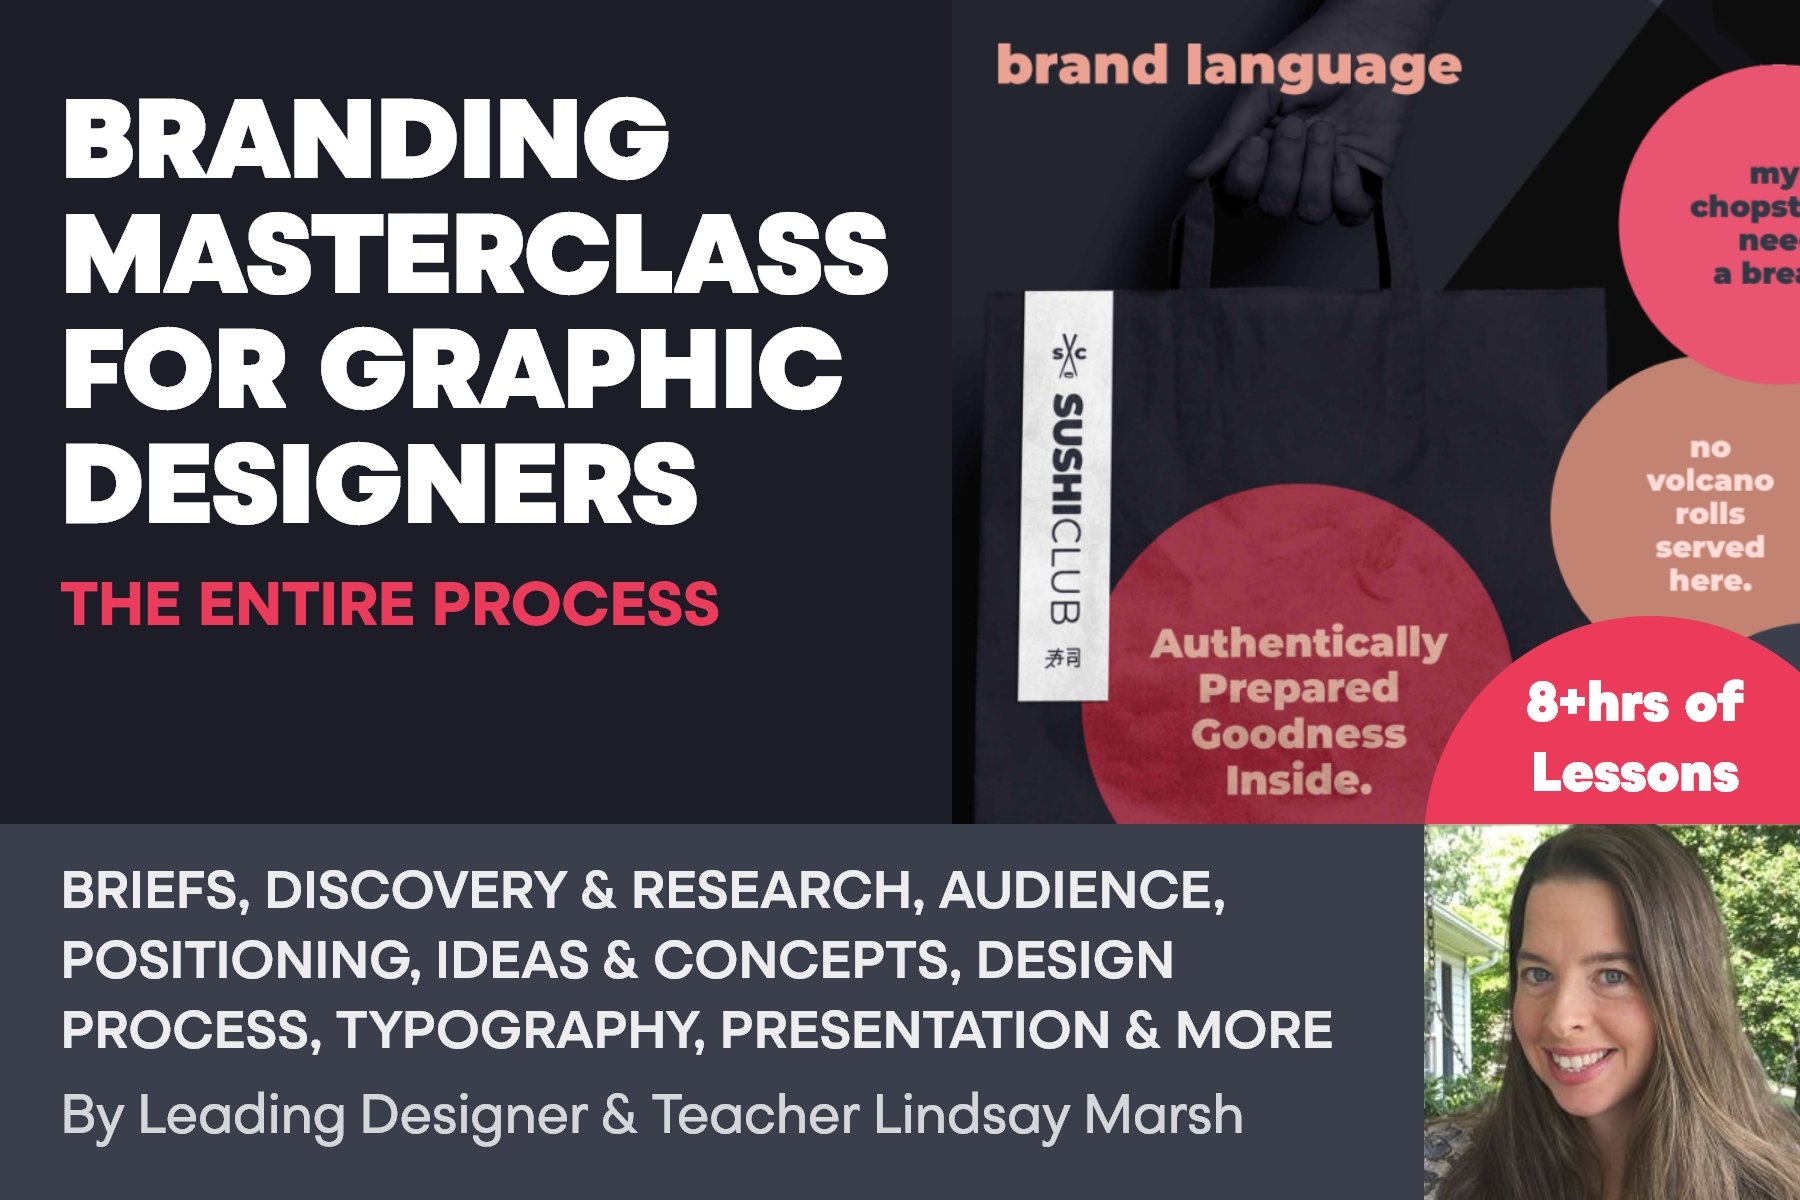 The Branding Masterclass for Graphic Designers: The Entire Process